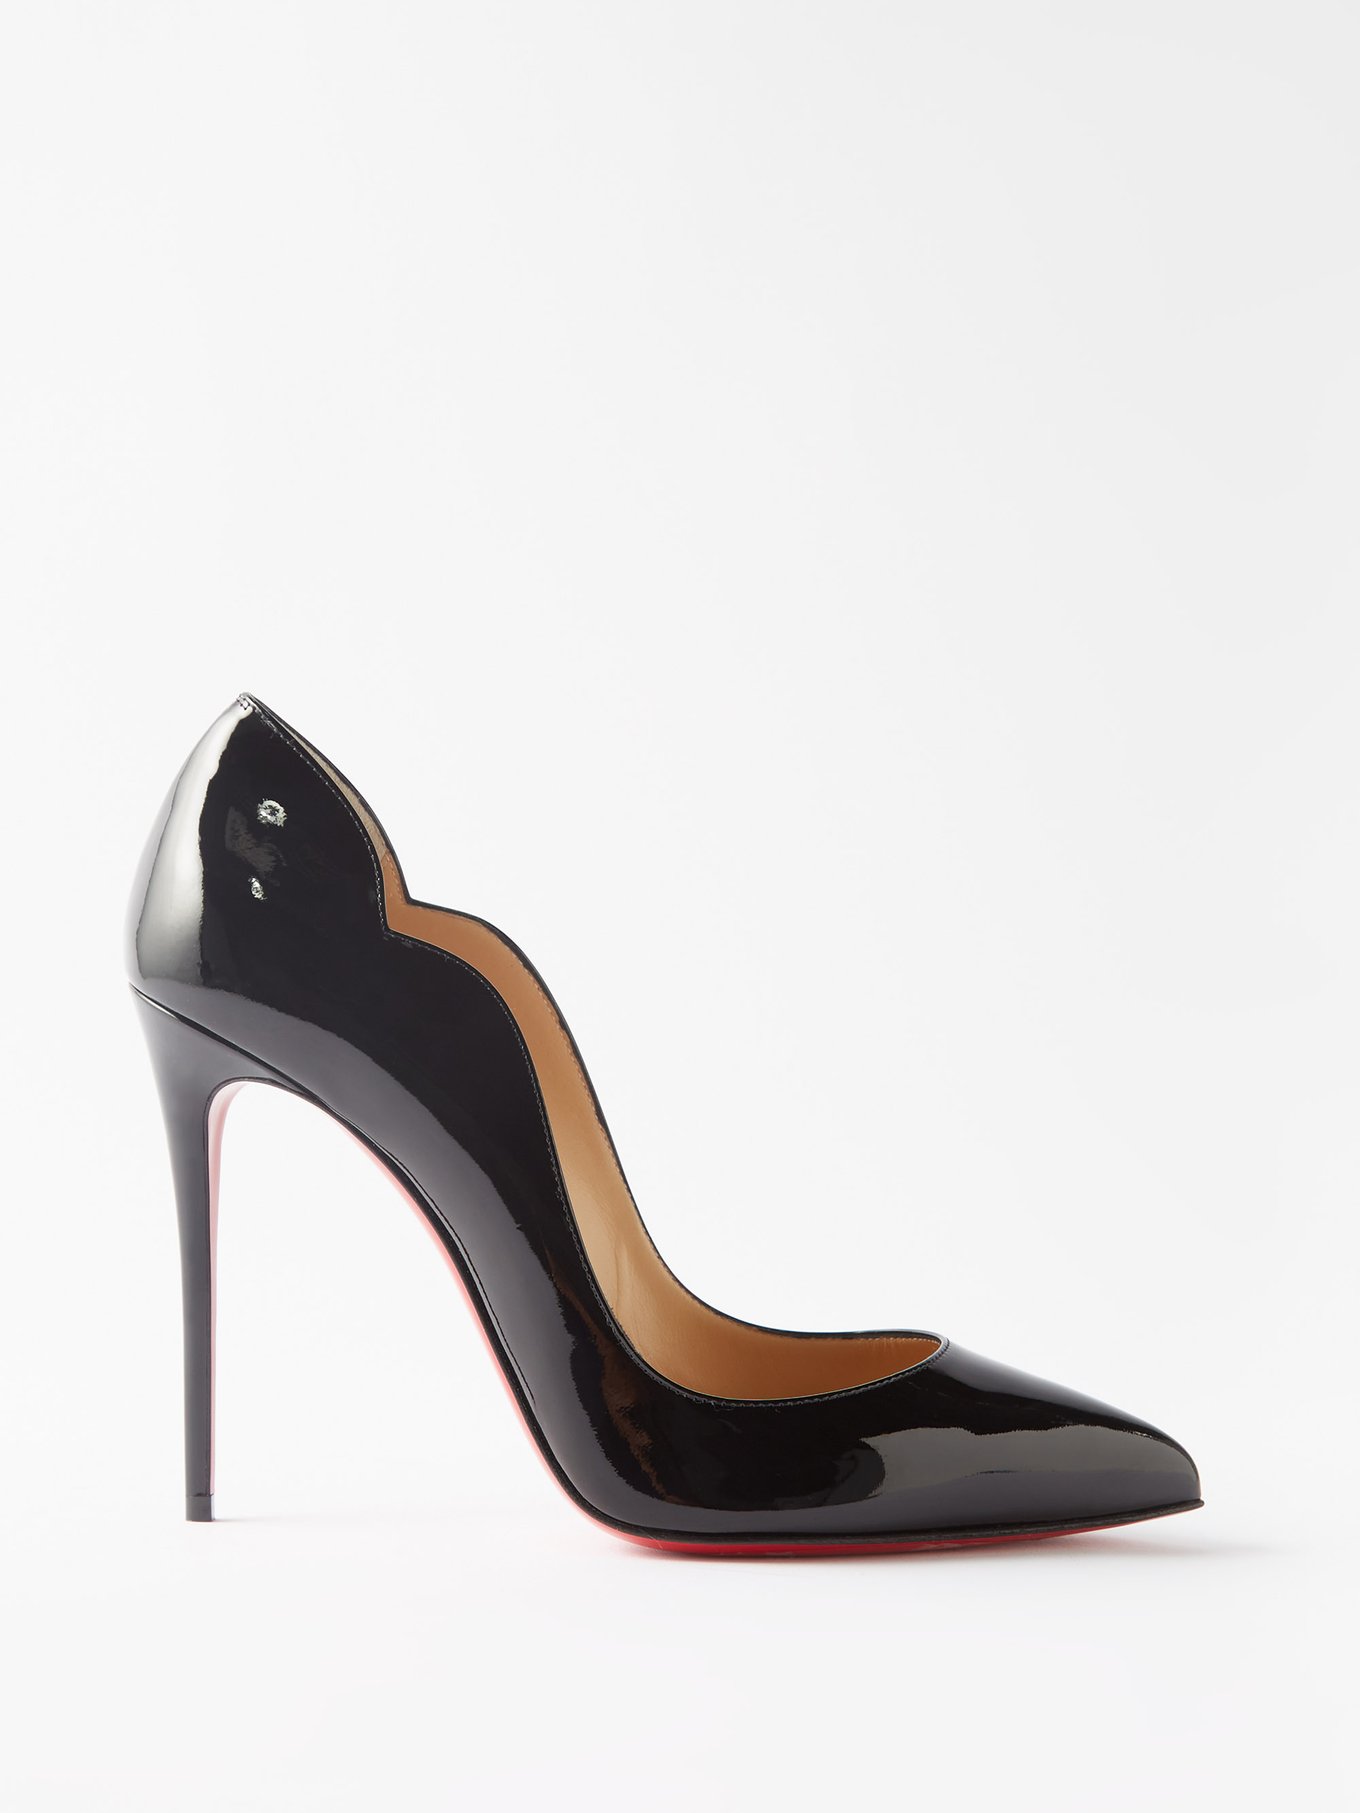 Christian Louboutin Hot Chick 100 Loubi Odissey Patent Red Sole